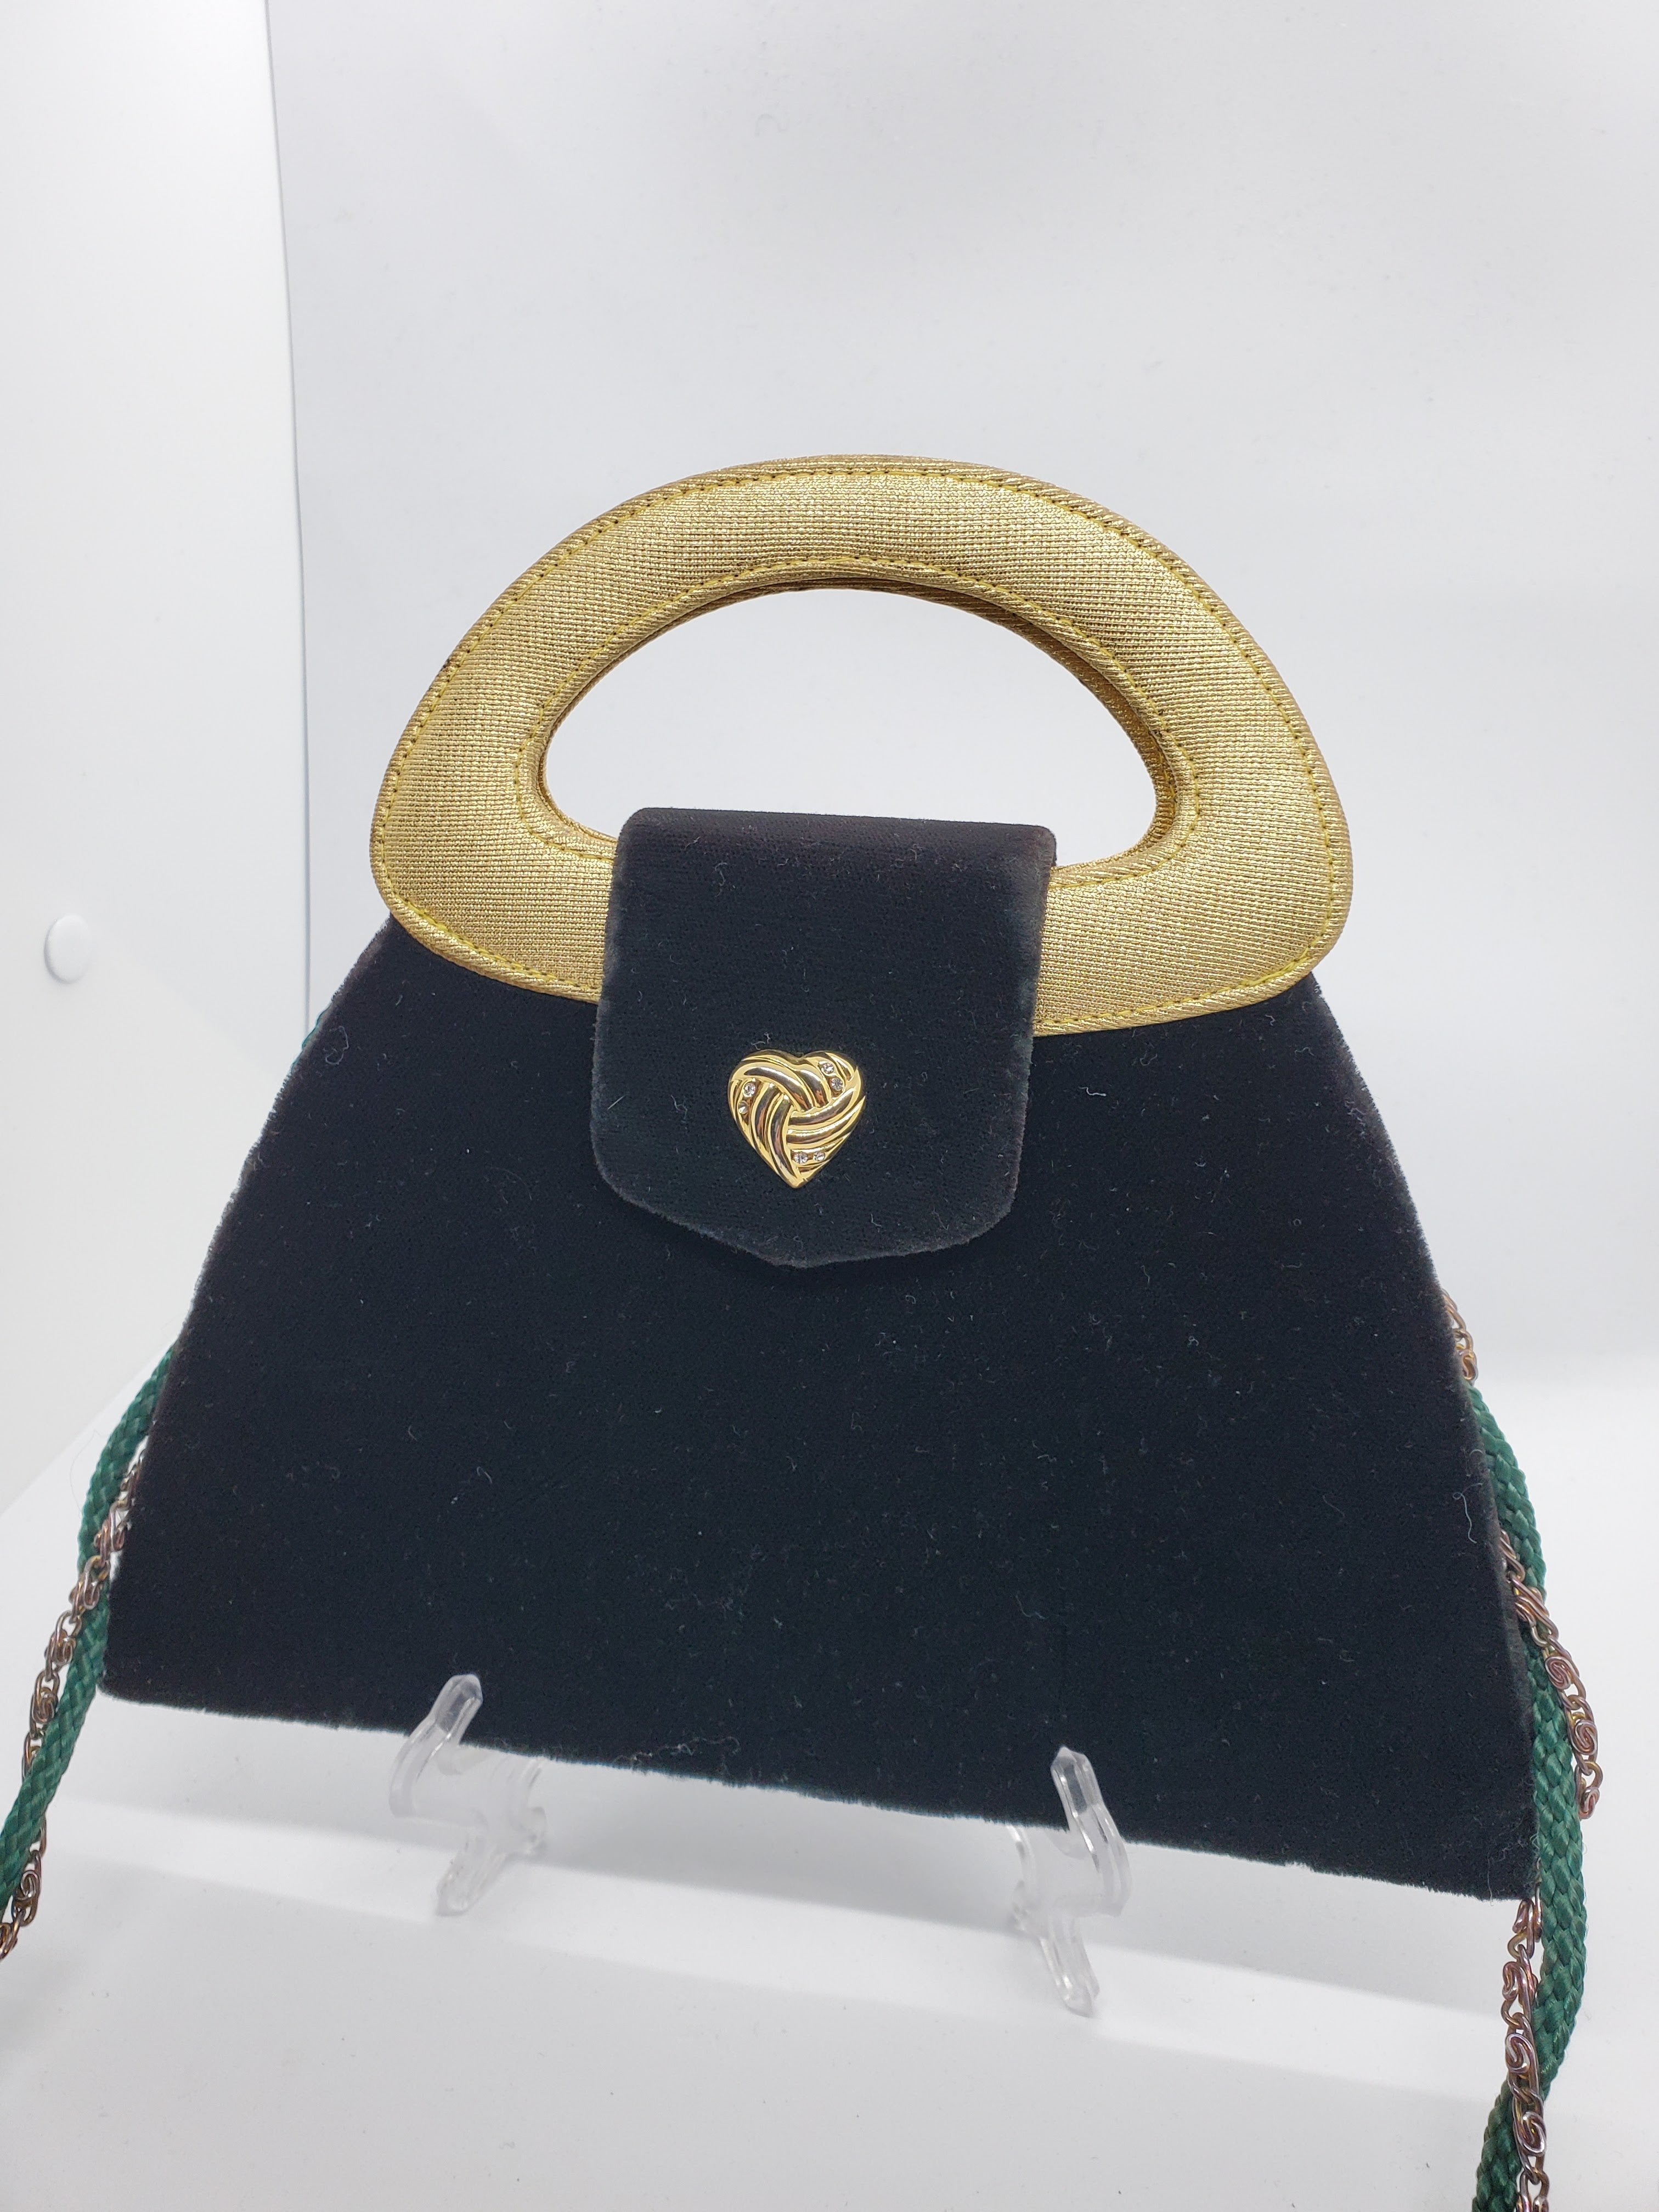 3/4 view of green and gold velvet handbag with heart detail